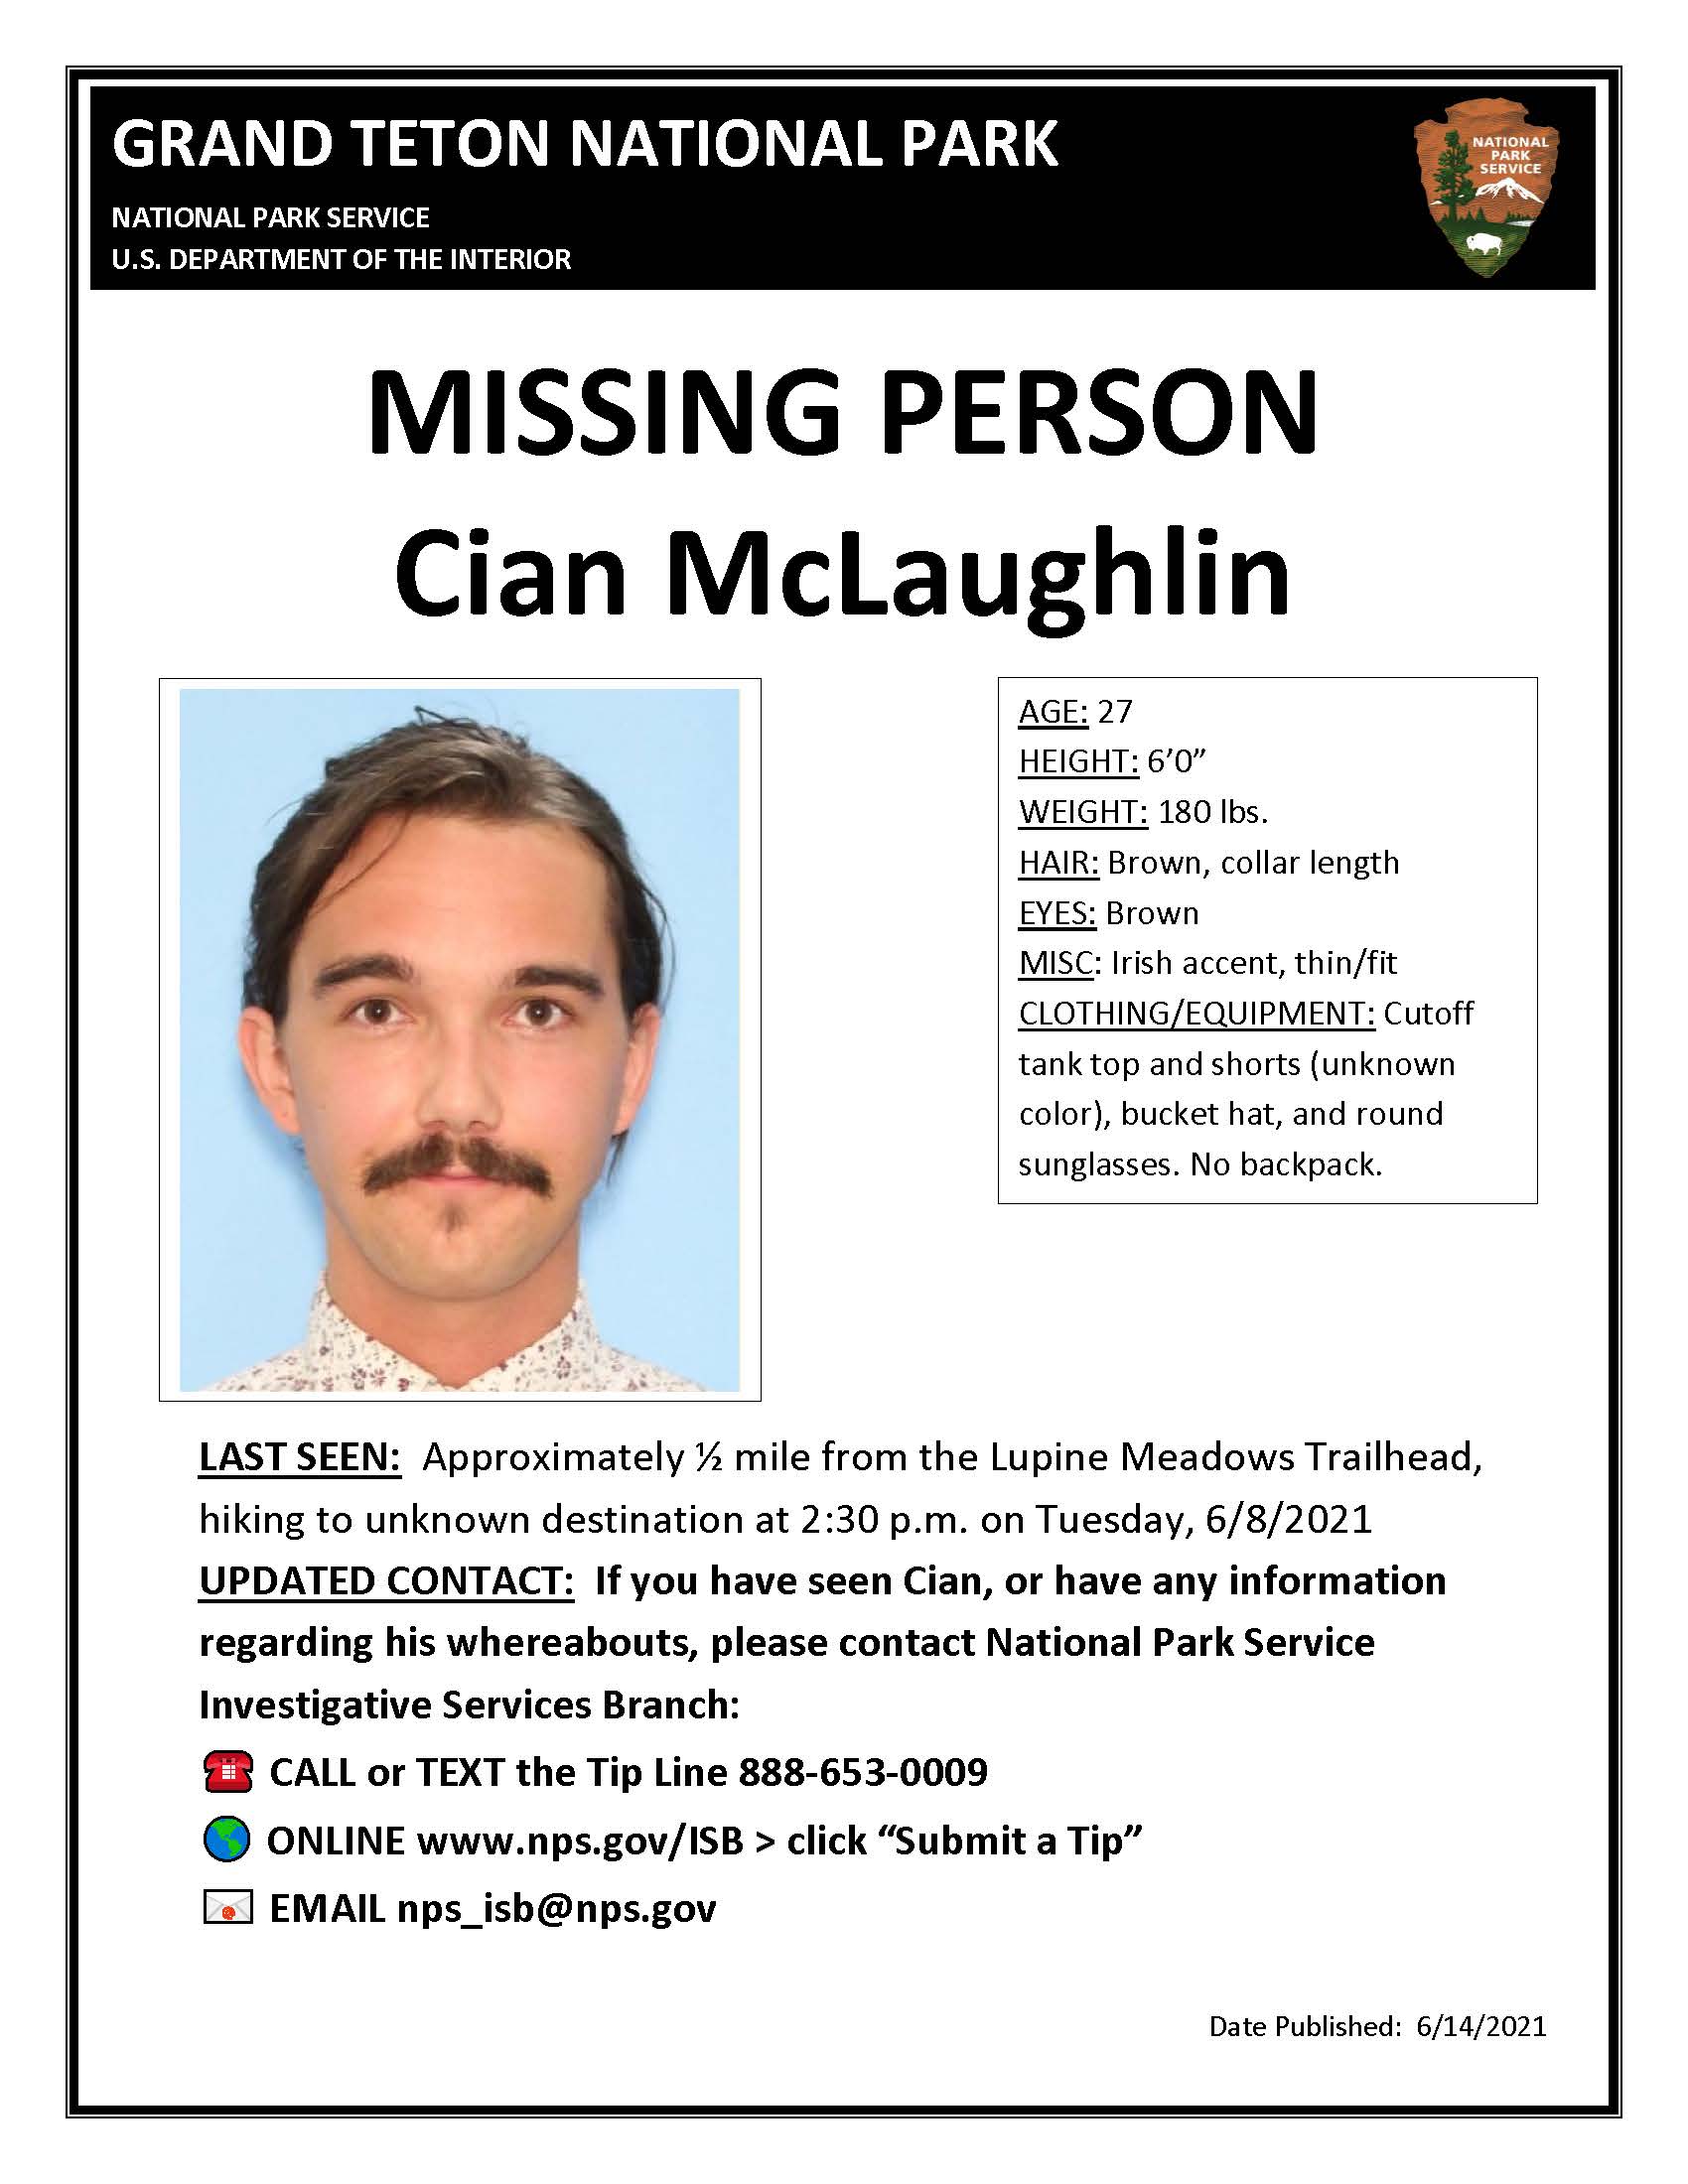 Updated missing person flyer: Cian McLaughlin